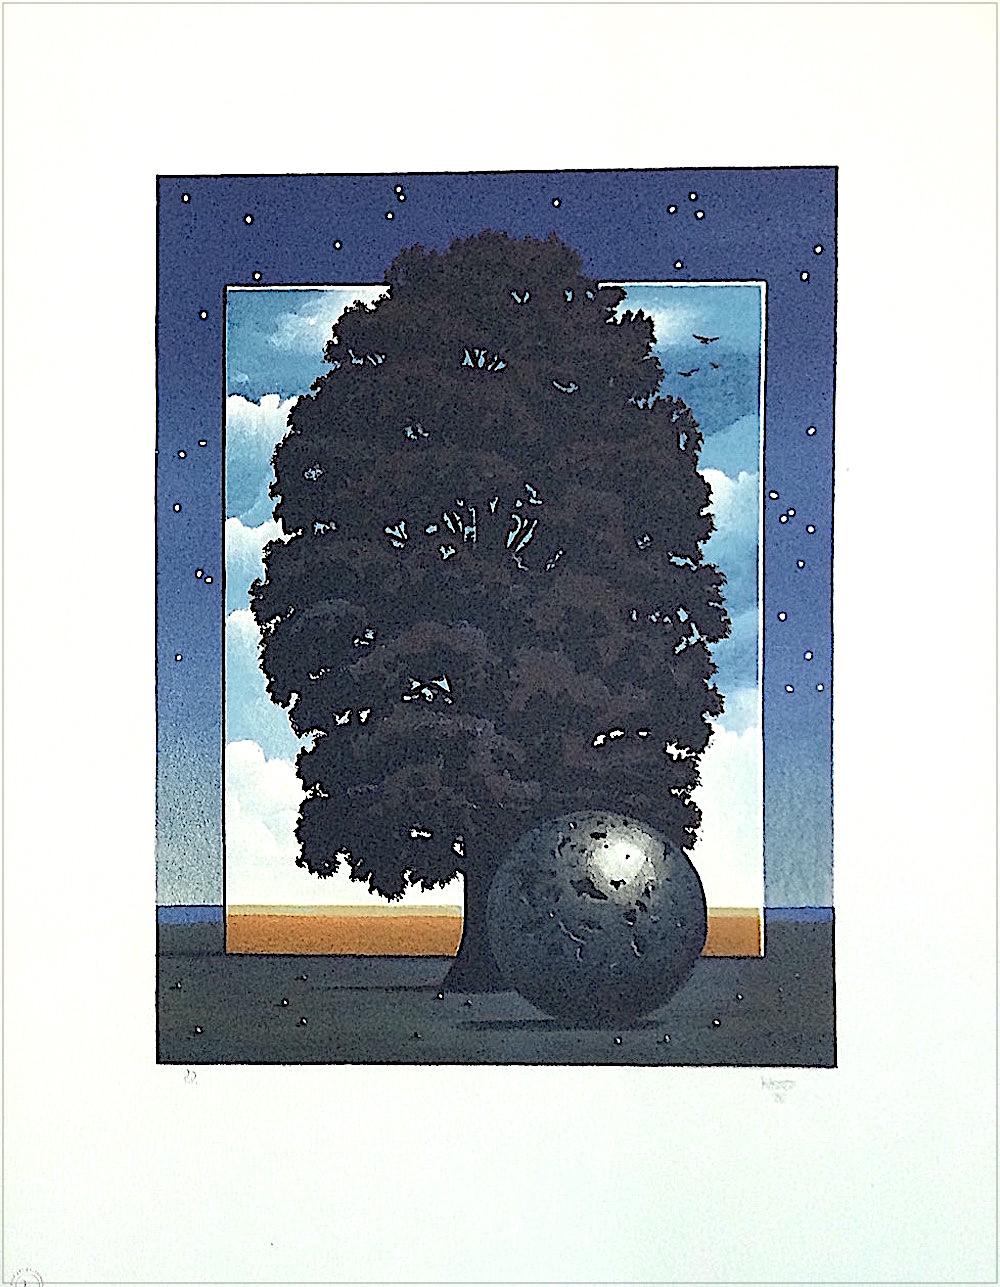 Michael Hasted Landscape Print - LIGHT OF DISCOVERY Hand Drawn Lithograph, Surrealist Landscape, Night Sky, Tree 